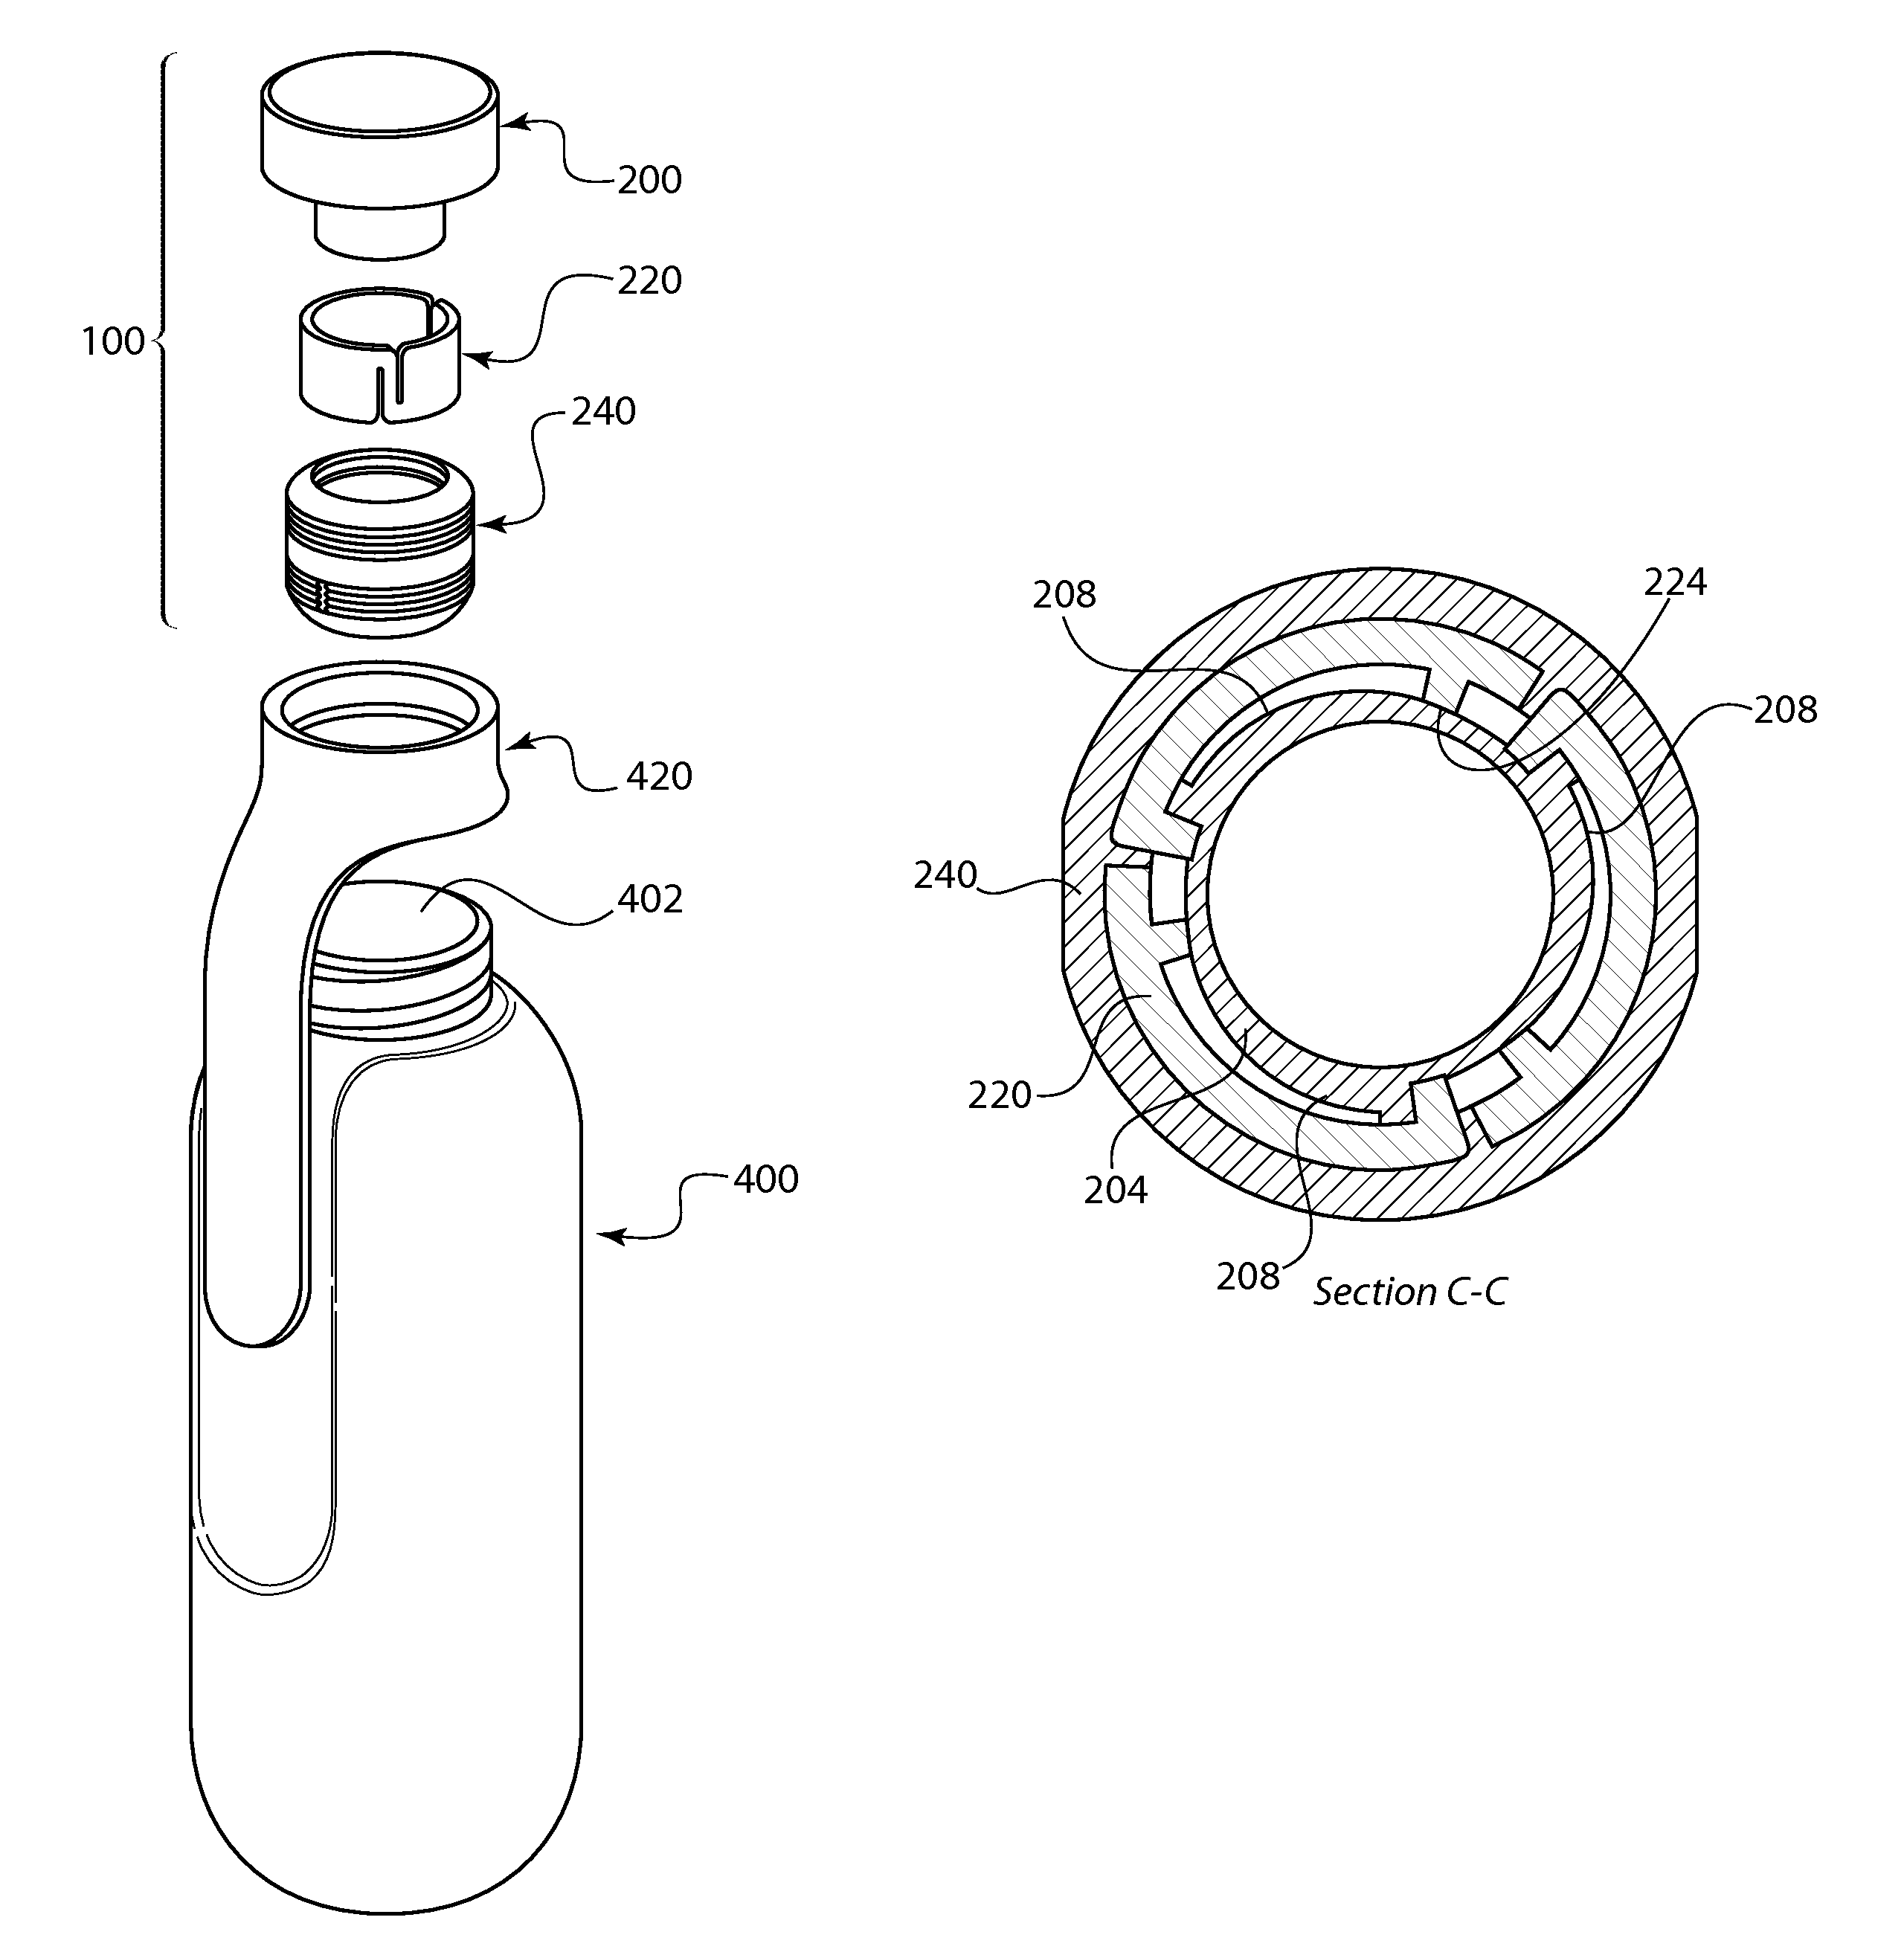 Expanding sealing locking systems and methods